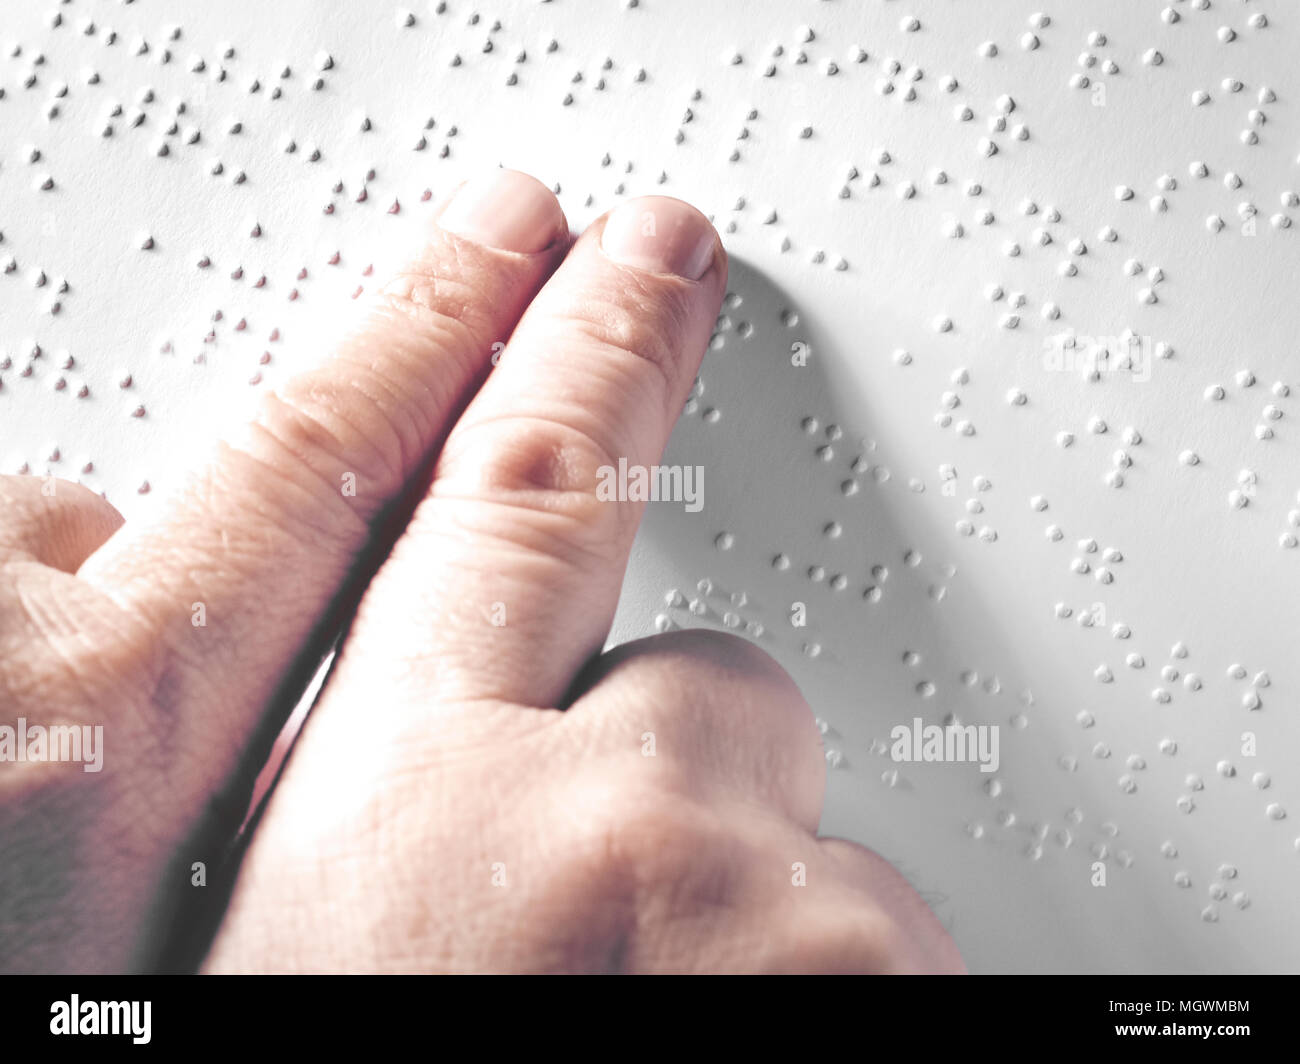 Hands of a blind person reading some braille text touching the relief. Horizontal Stock Photo